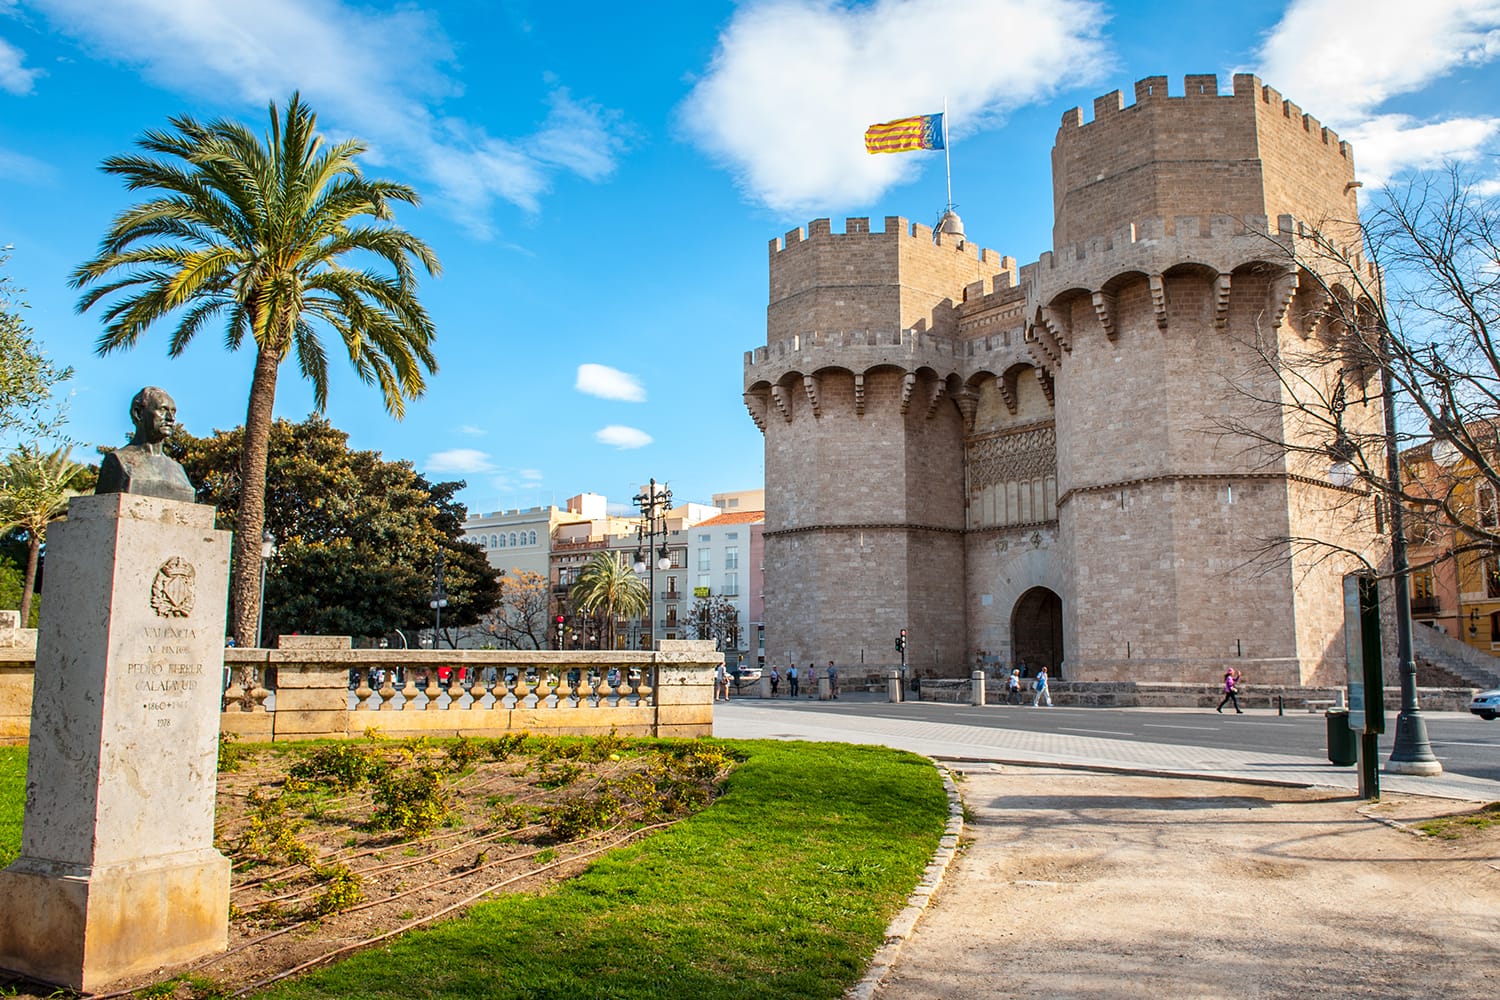 Serrano Towers, one of the twelve gates that were found along the old medieval city wall in Valencia, Spain.